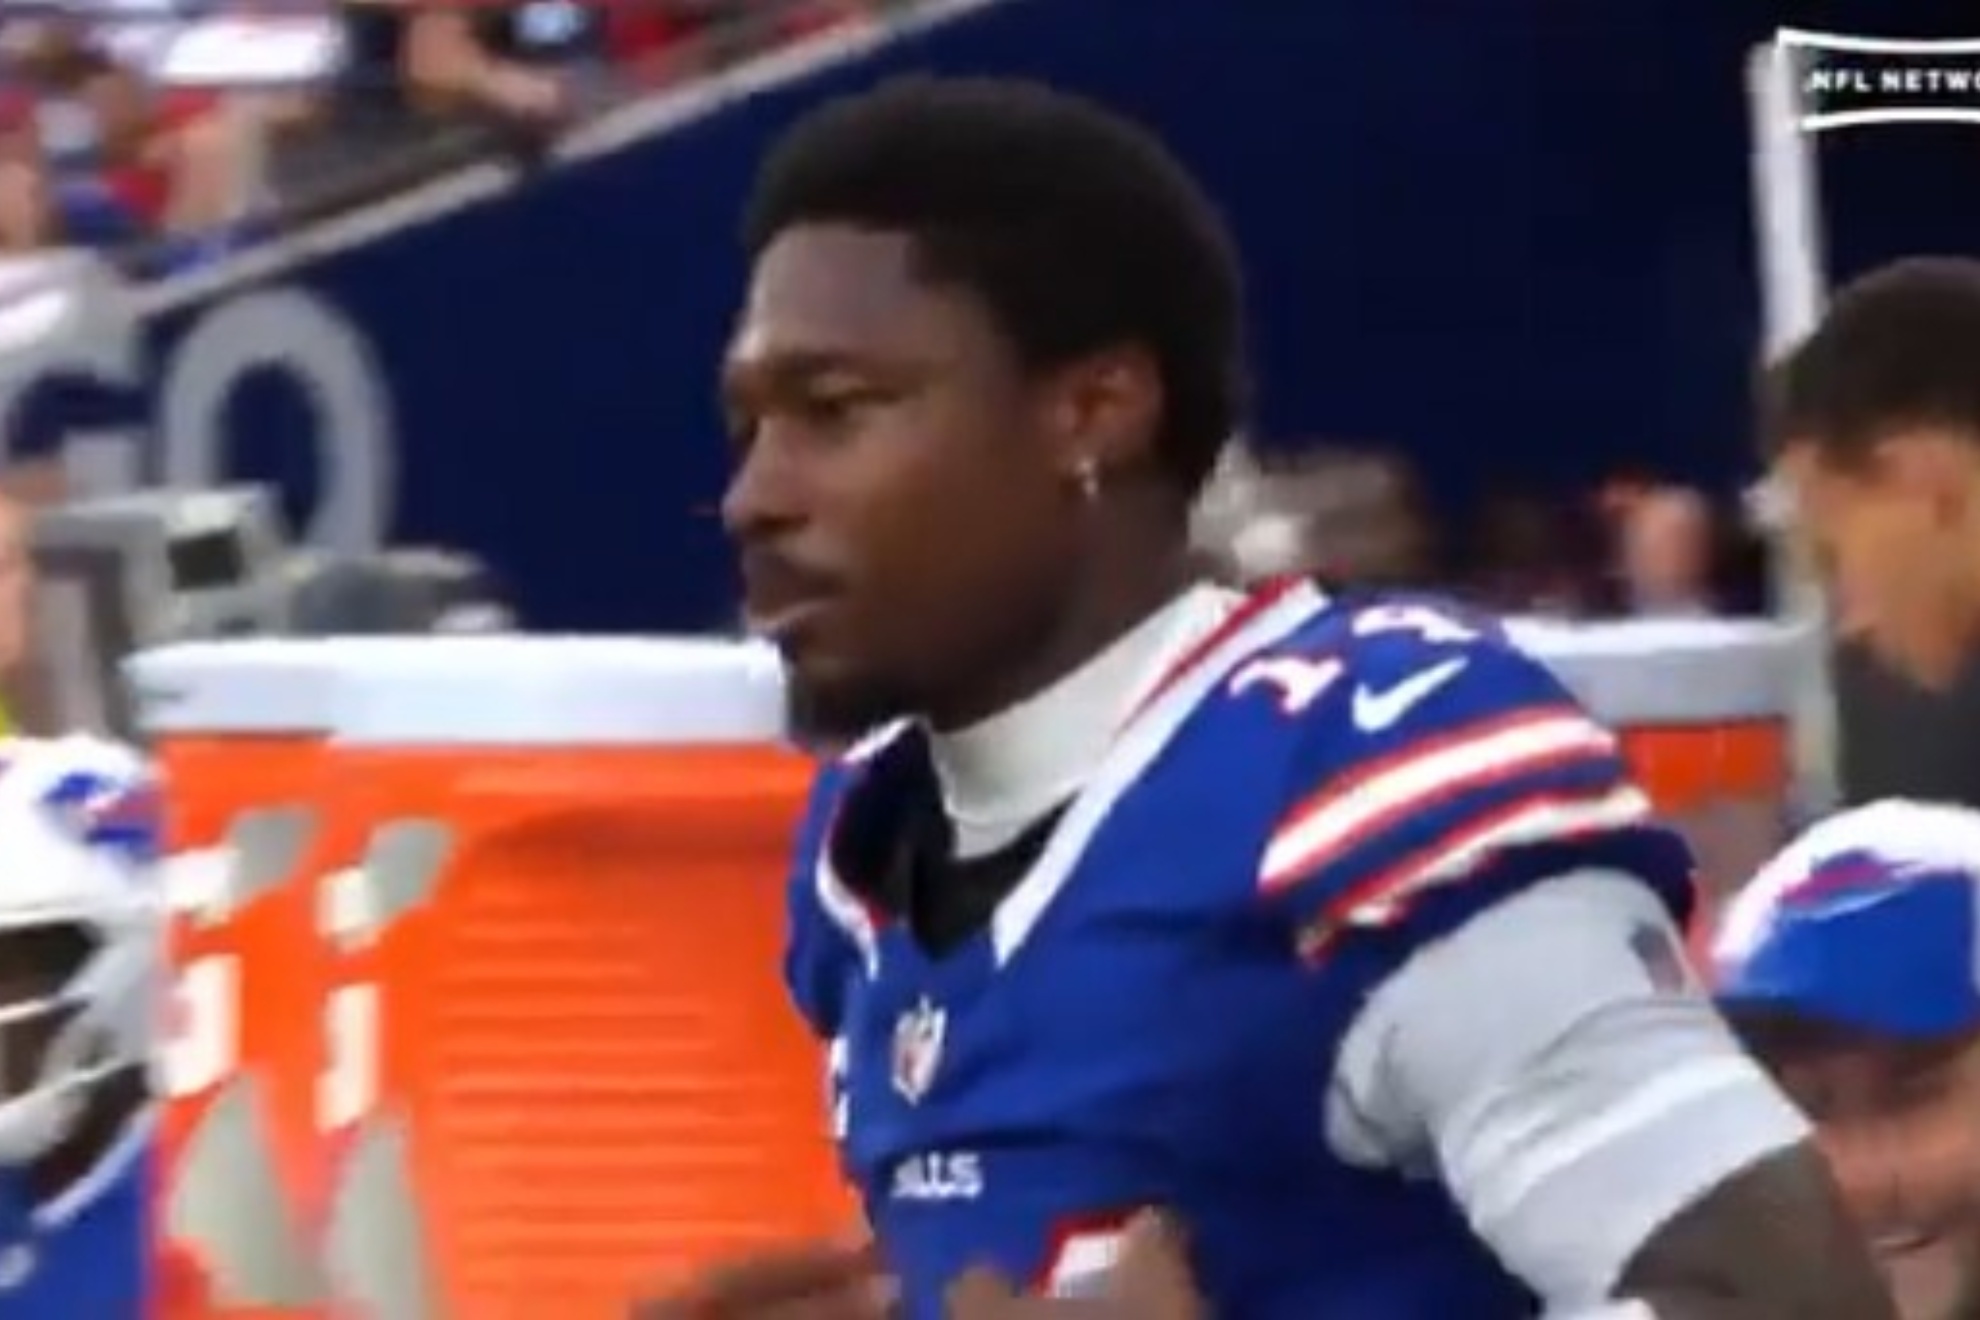 Steffon Diggs had an outburst on the Bills sideline during their game against the Jaguars in London